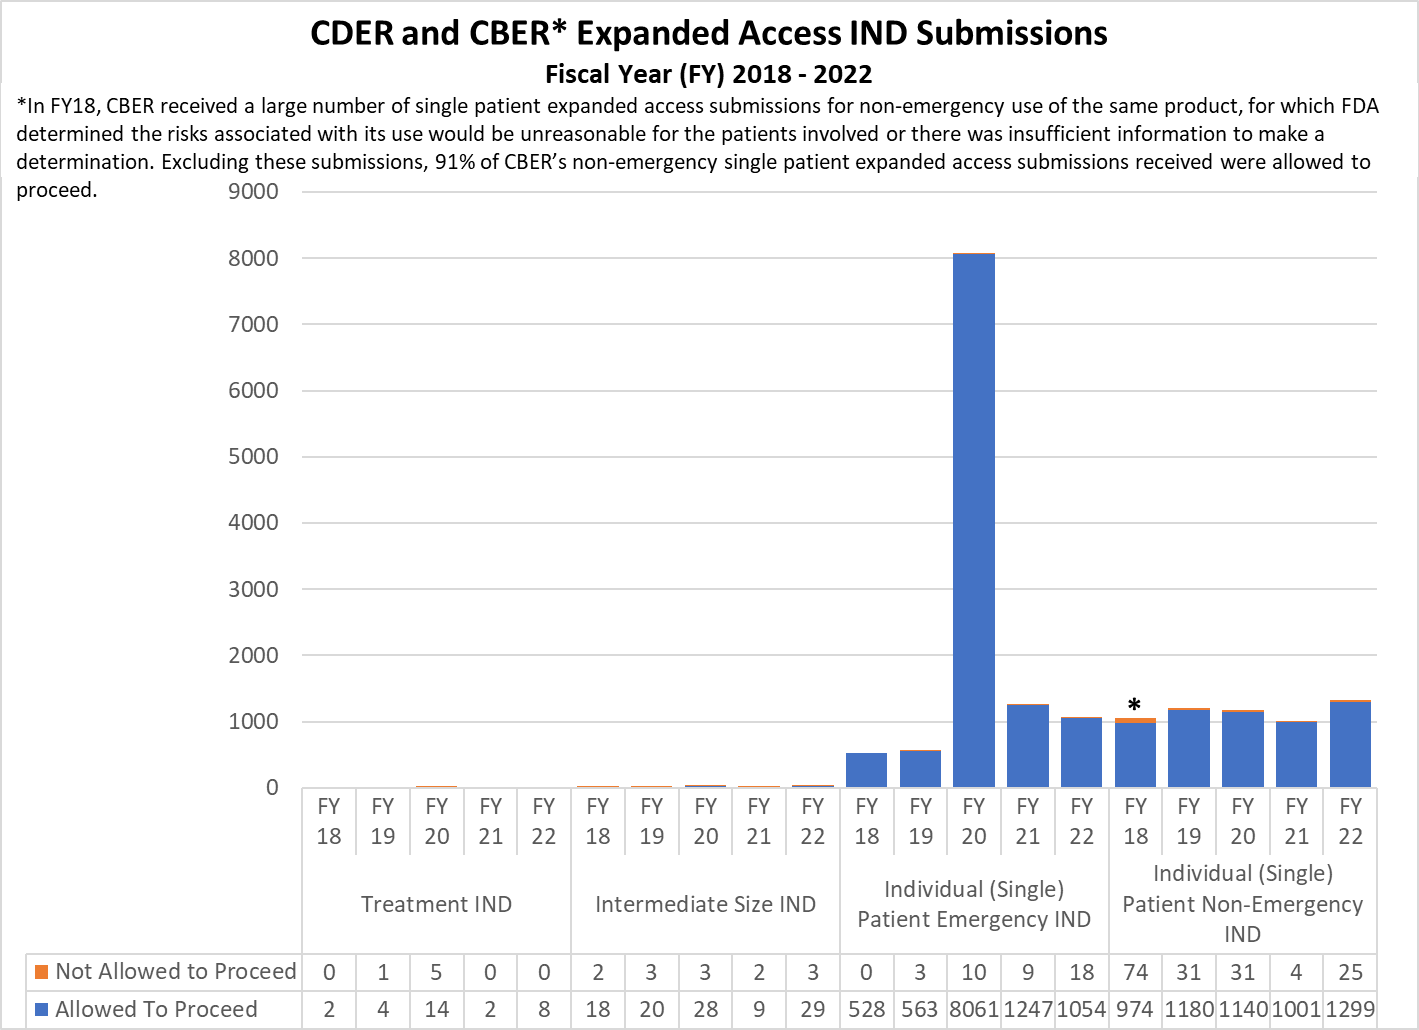 CDER and CBER Expanded Access IND Submissions Fiscal Year (FY) 2018 - 2022